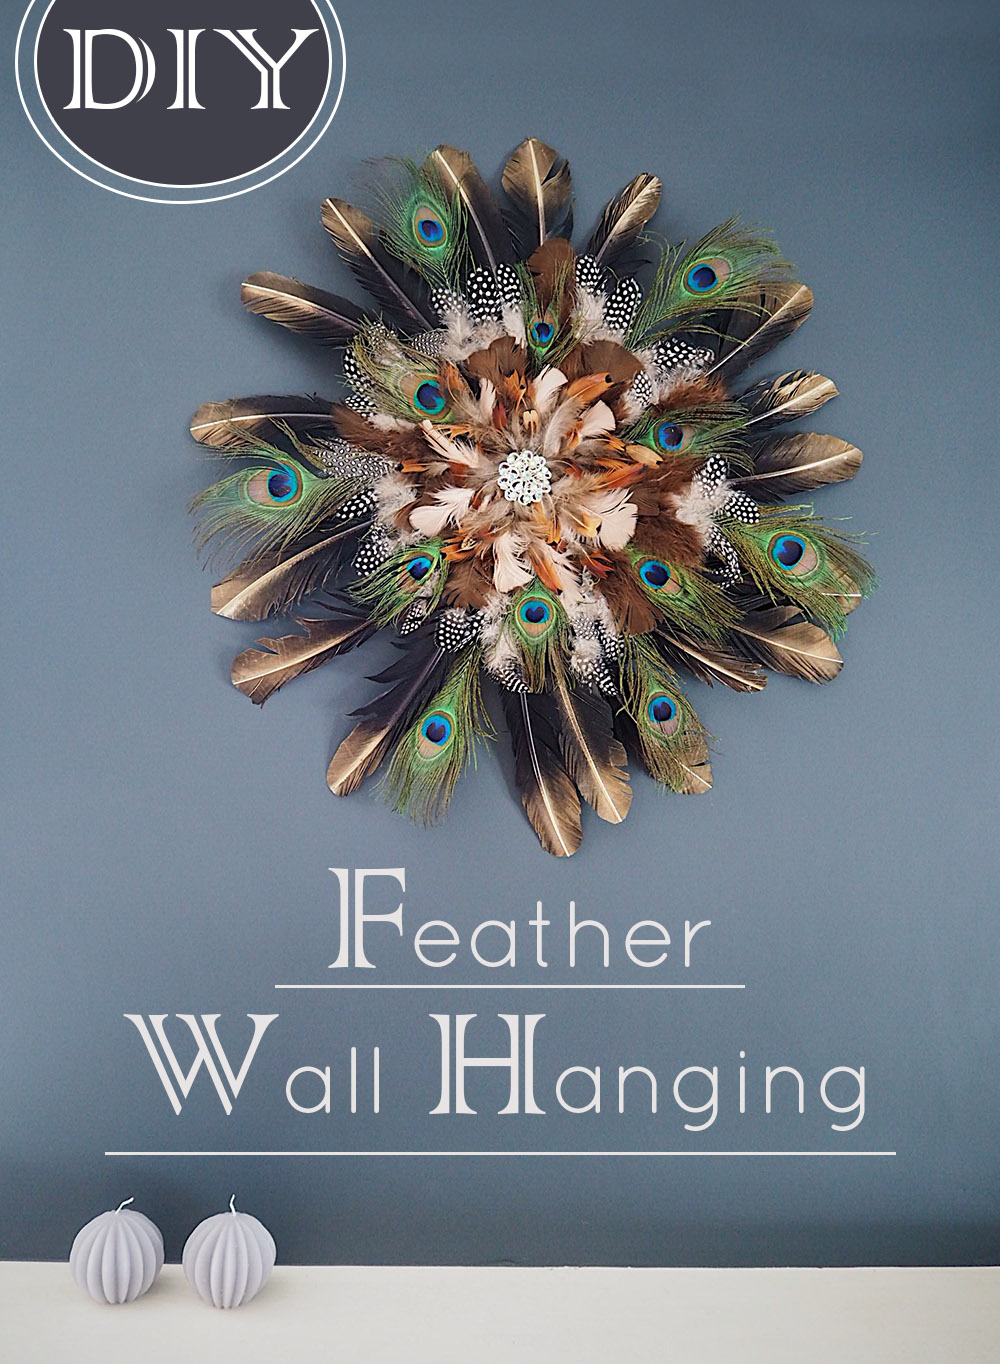 Feather wall hangings add a sense of drama and fun in an interior scheme. Learn how to craft your own with these simple to follow, step by step instructions, for a DIY father wall hanging. 